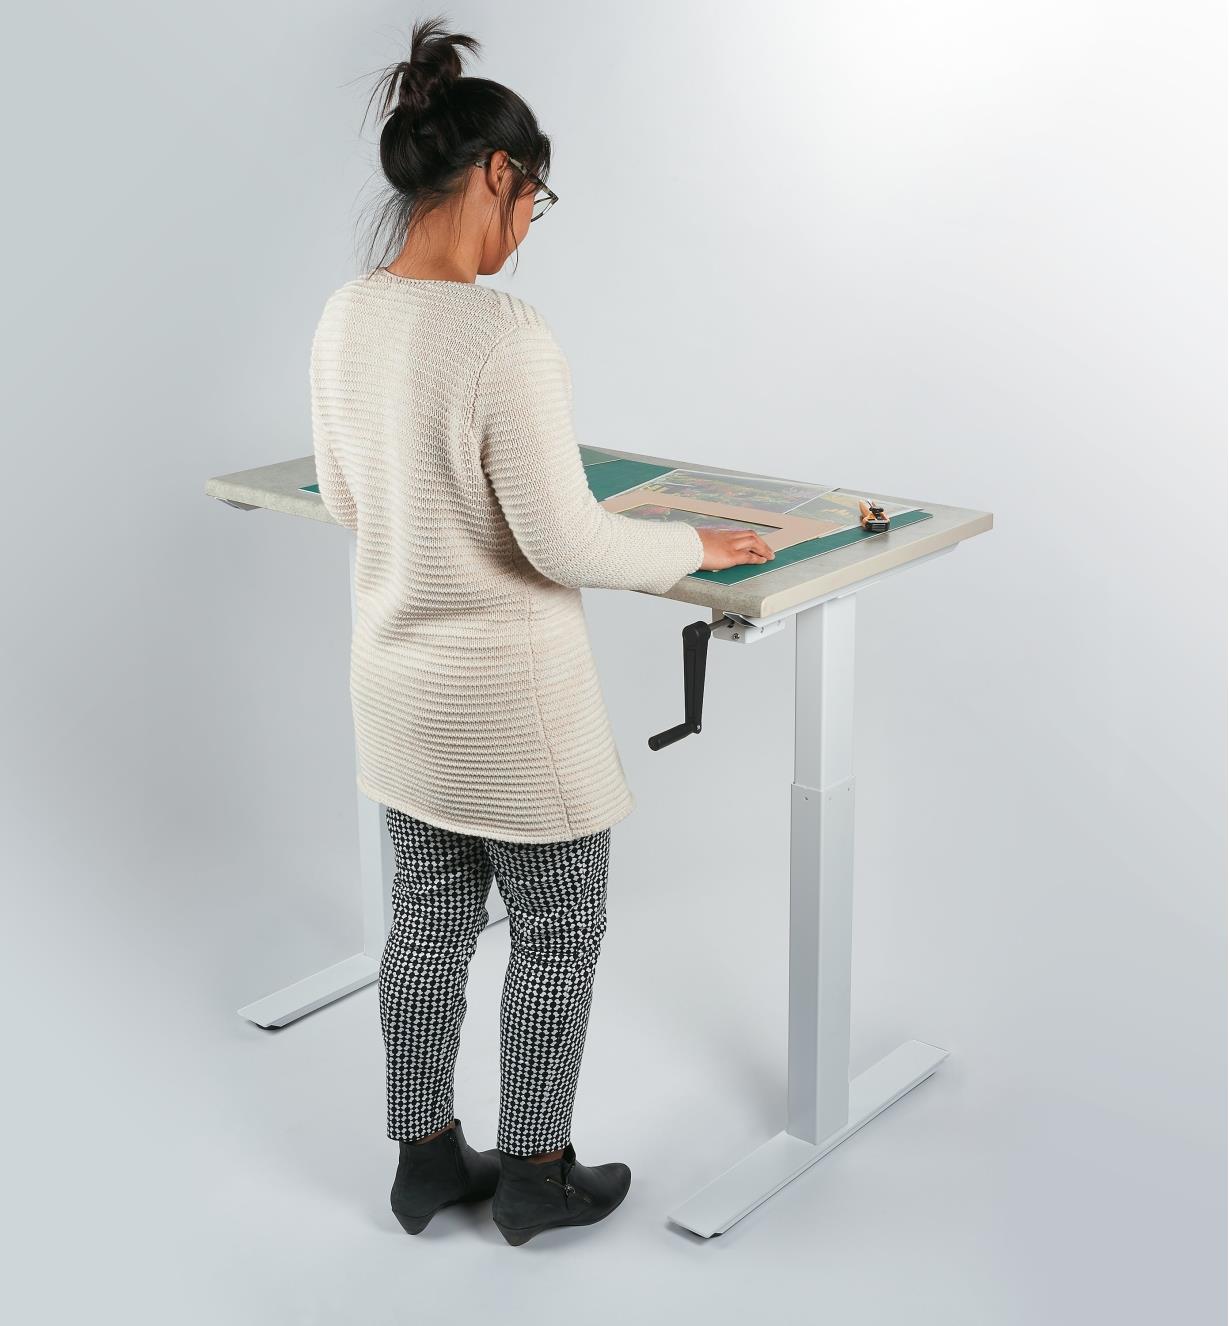 A woman standing works at a table made with the Manual Table Lift Kit